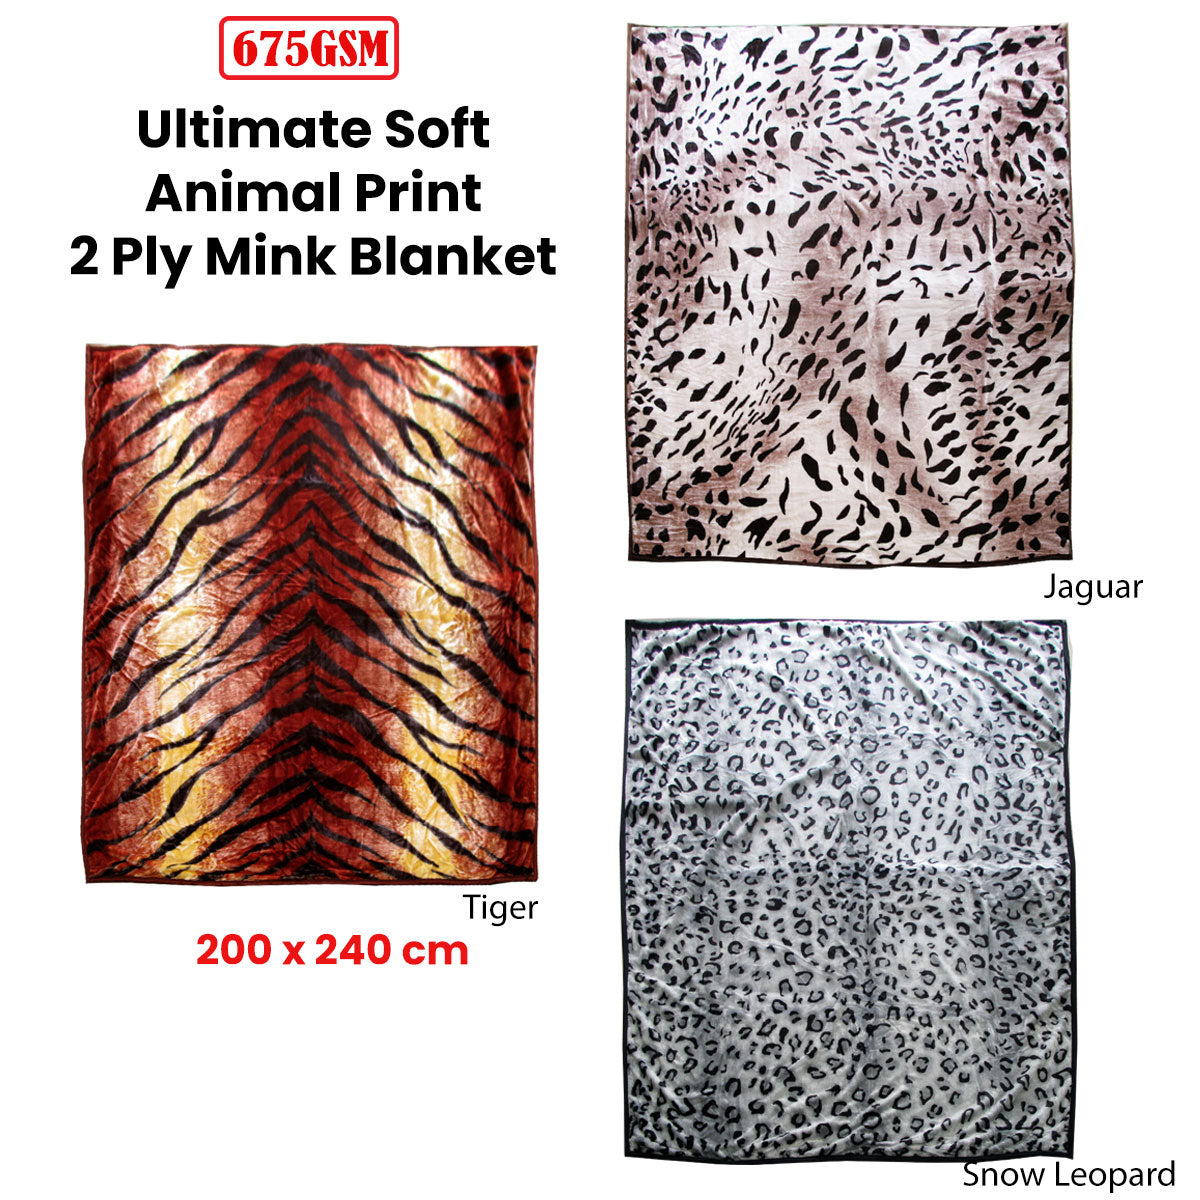 675gsm 2 Ply Animal Print Faux Mink Blanket Queen 200x240 cm Tiger